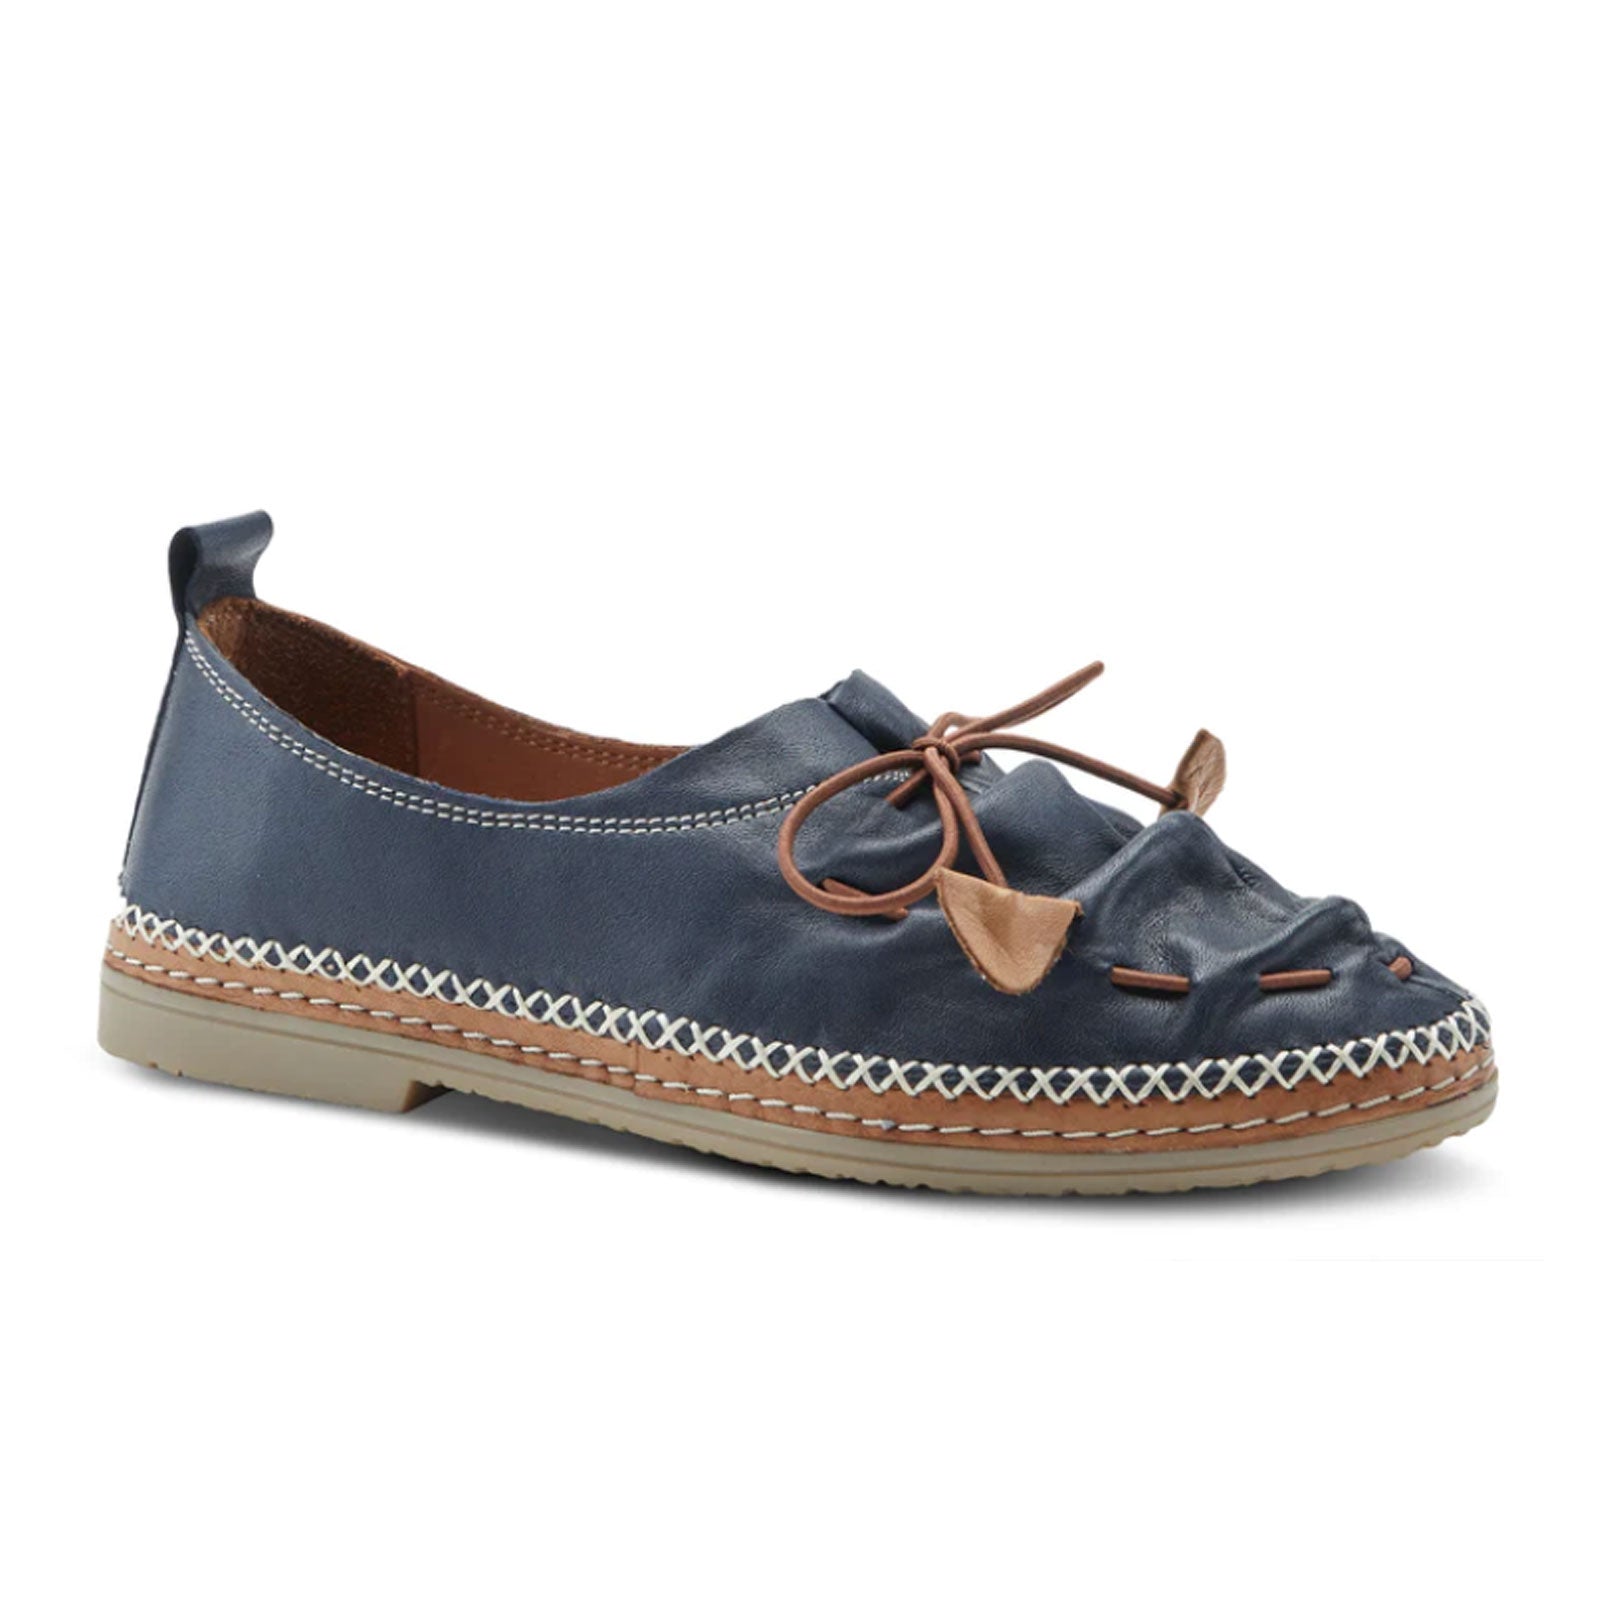 Spring Step Berna Slip On Loafer (Women) - Navy Leather Dress-Casual - Slip Ons - The Heel Shoe Fitters